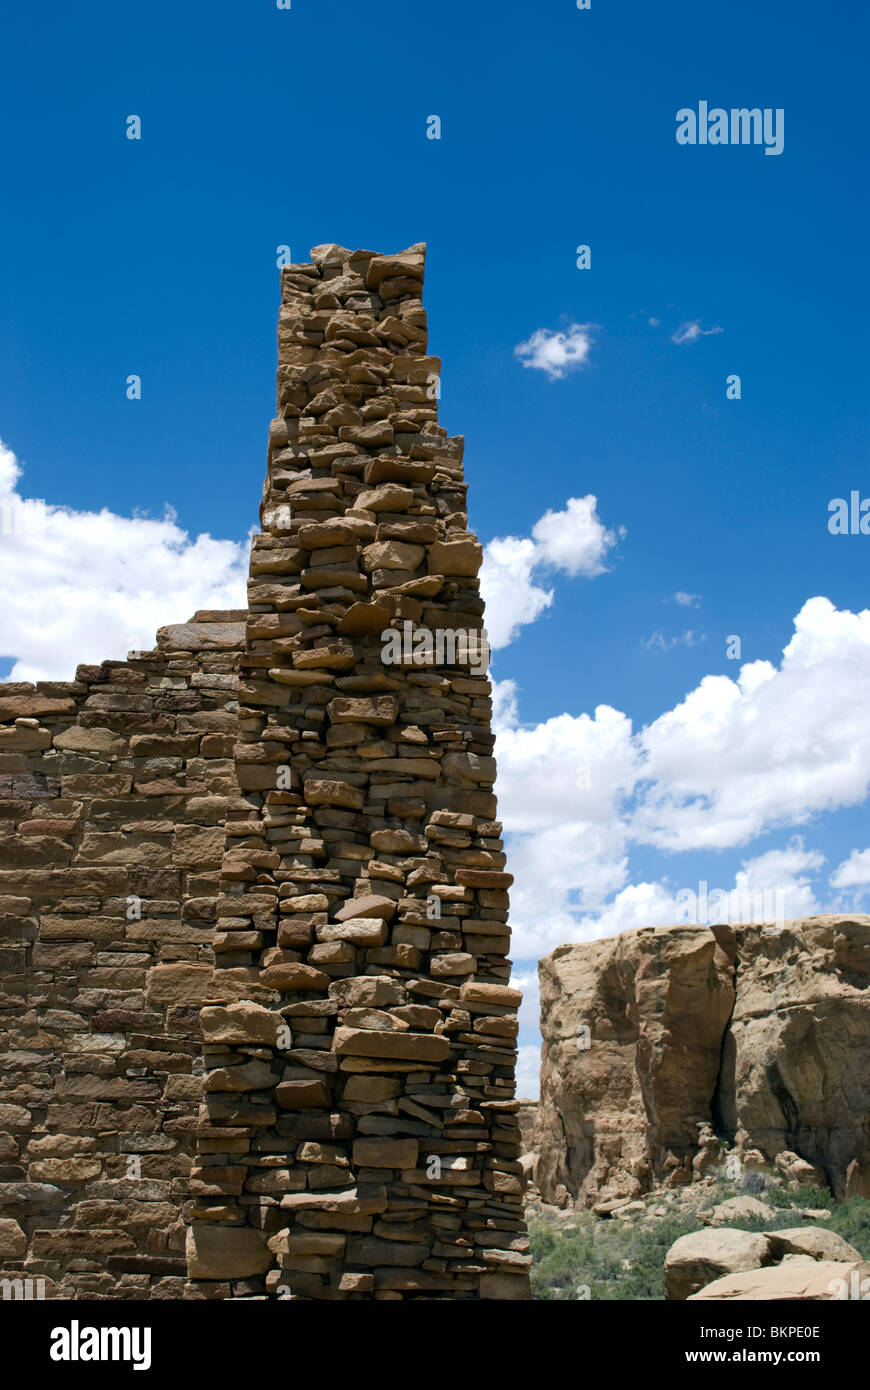 Exposed stone wall section from the Pueblo Bonito Great House located at Chaco Culture National Historical Park. Stock Photo